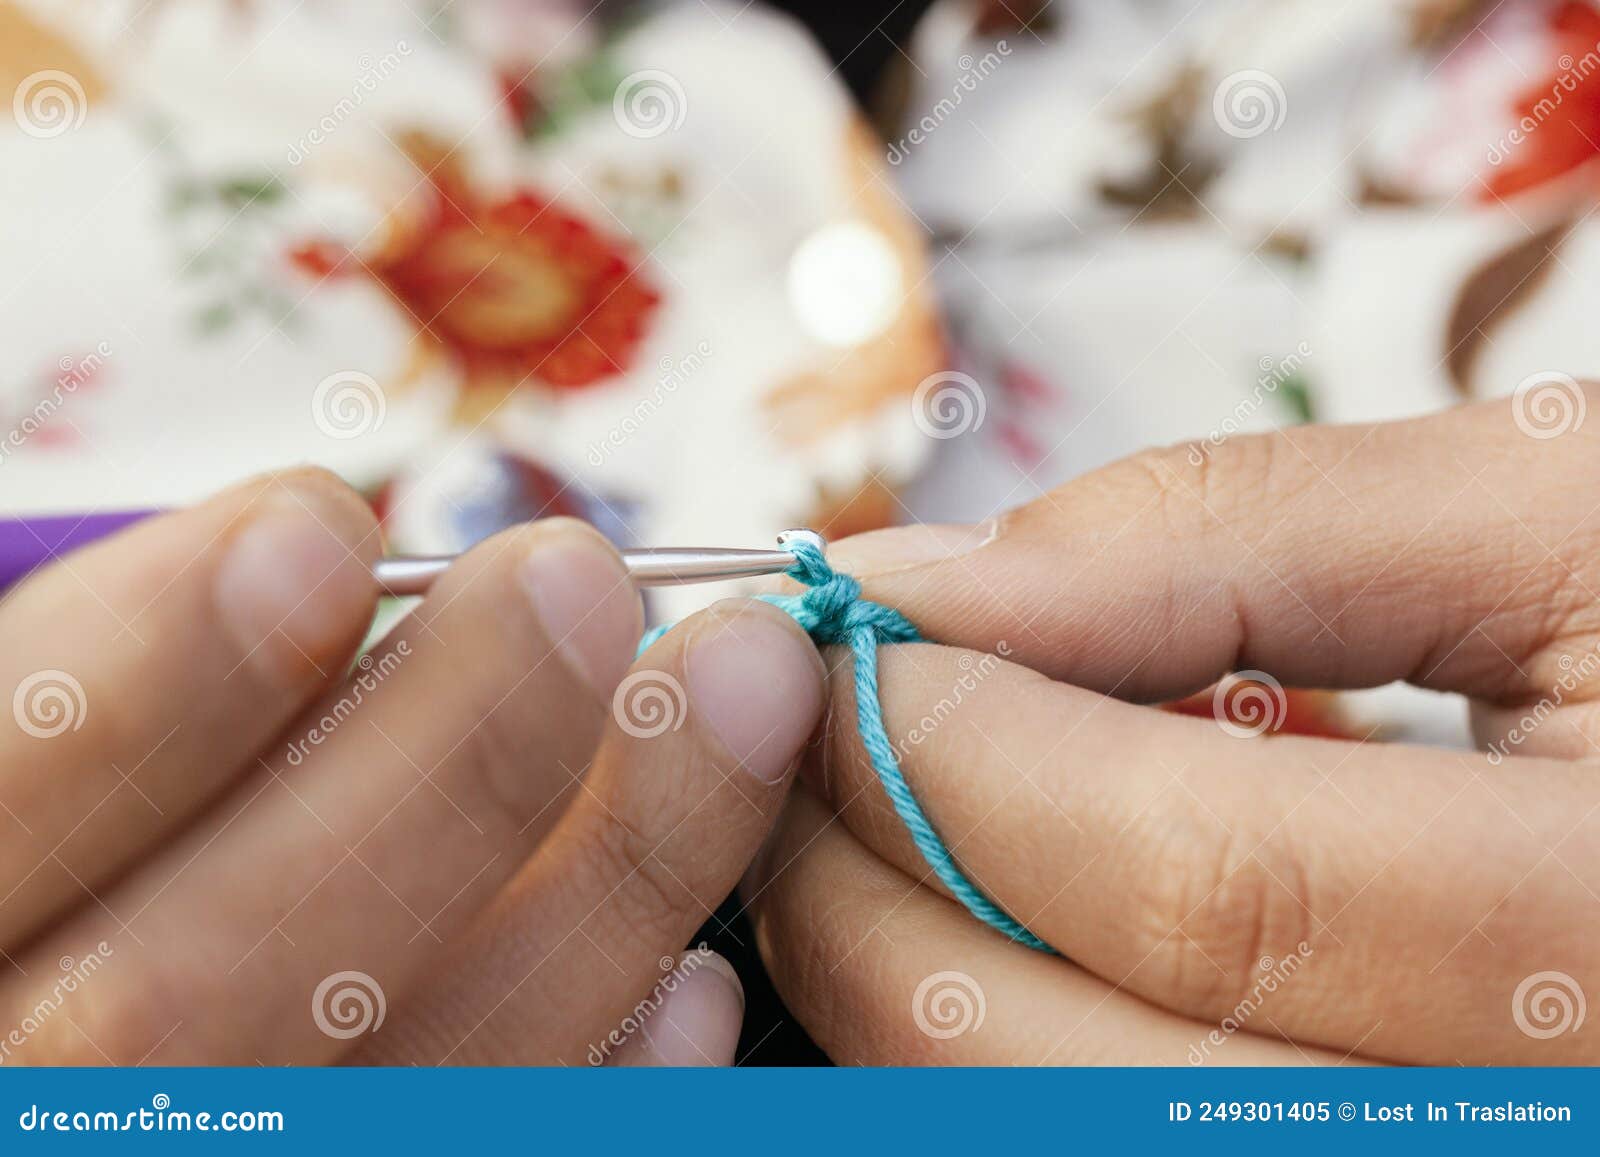 close-up point of view of a woman's fingers crocheting with the number 3 needle and green yarn